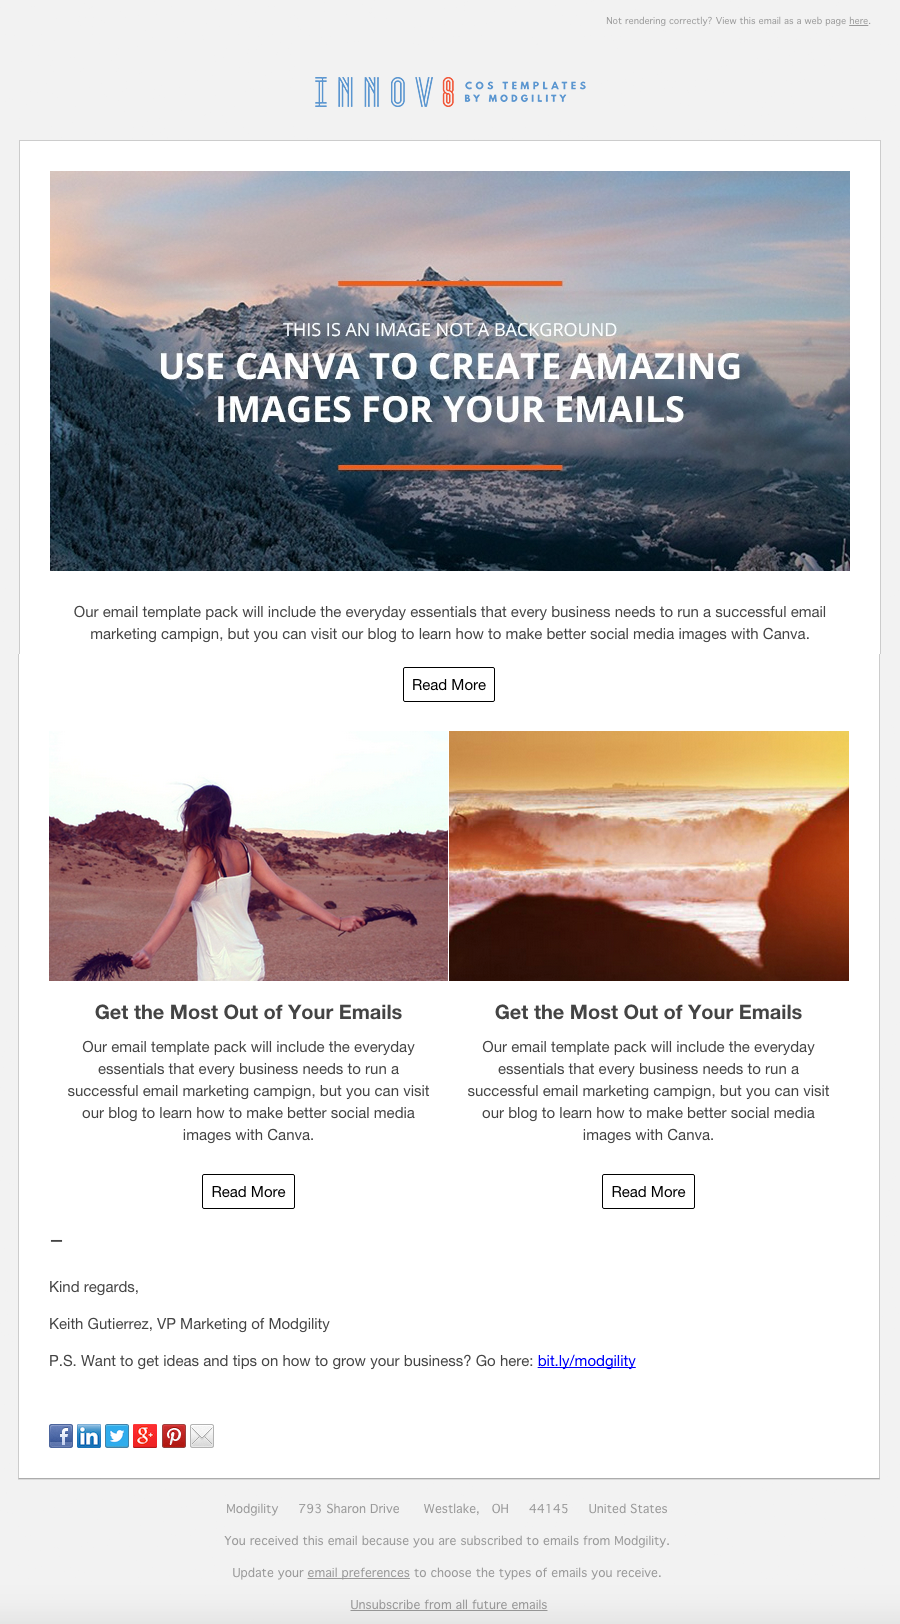 innovate-email-images